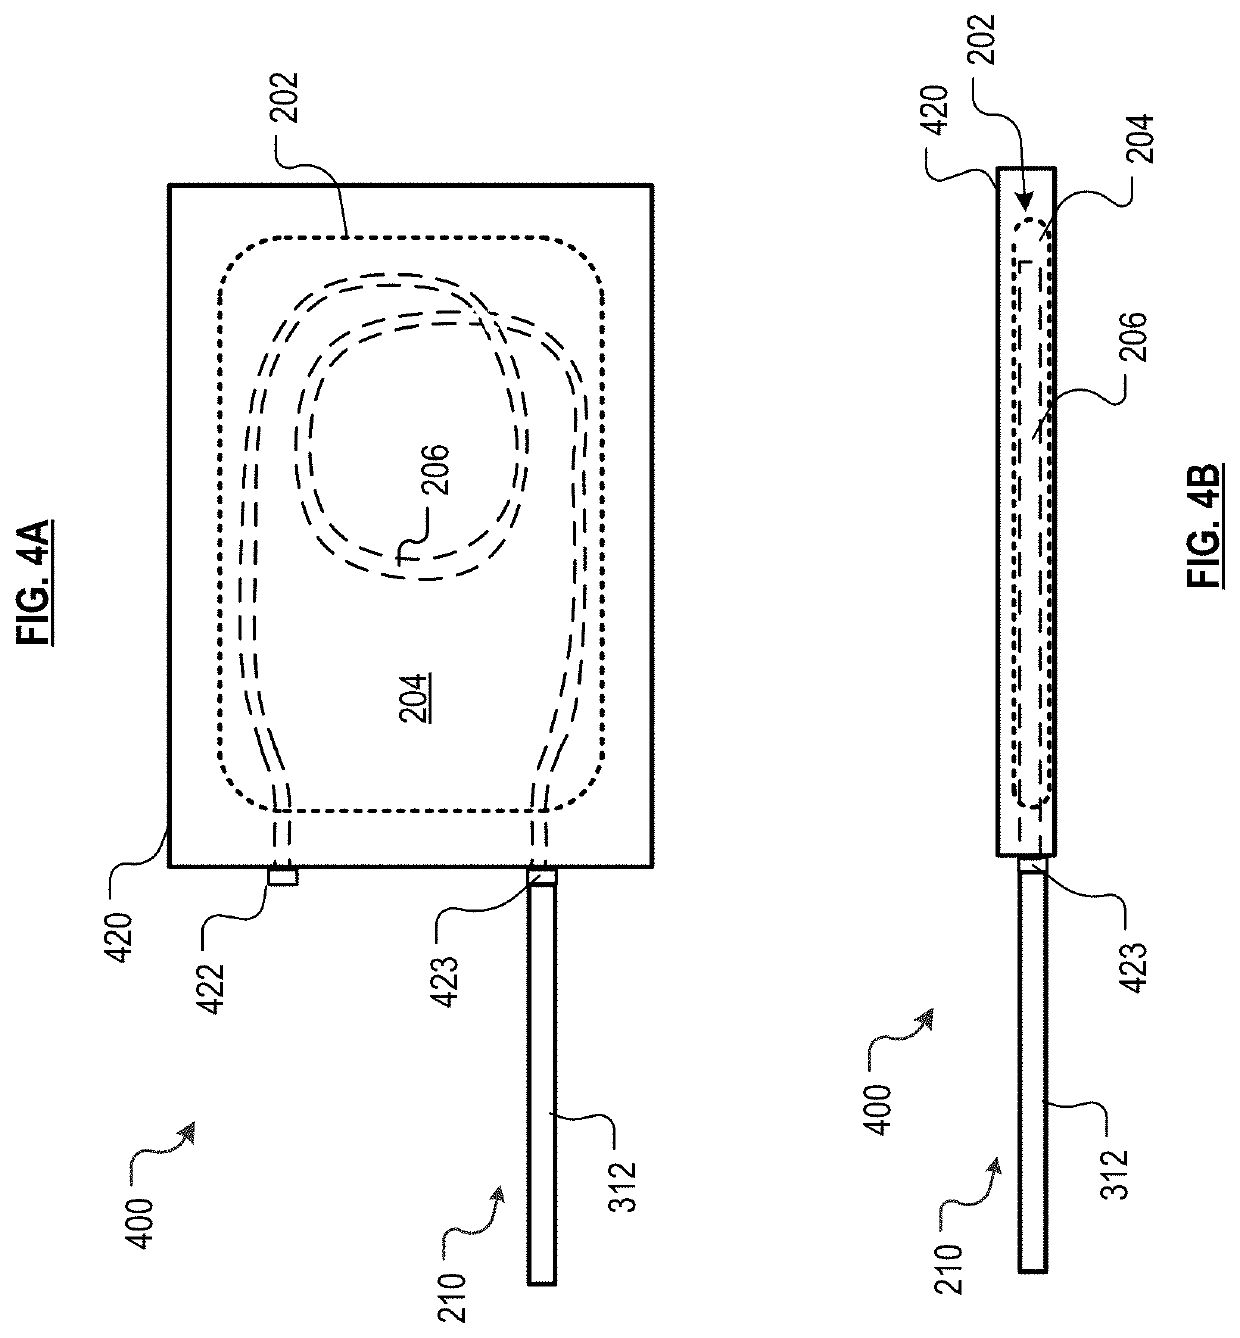 Low-flow oxygen therapy humidifier and method